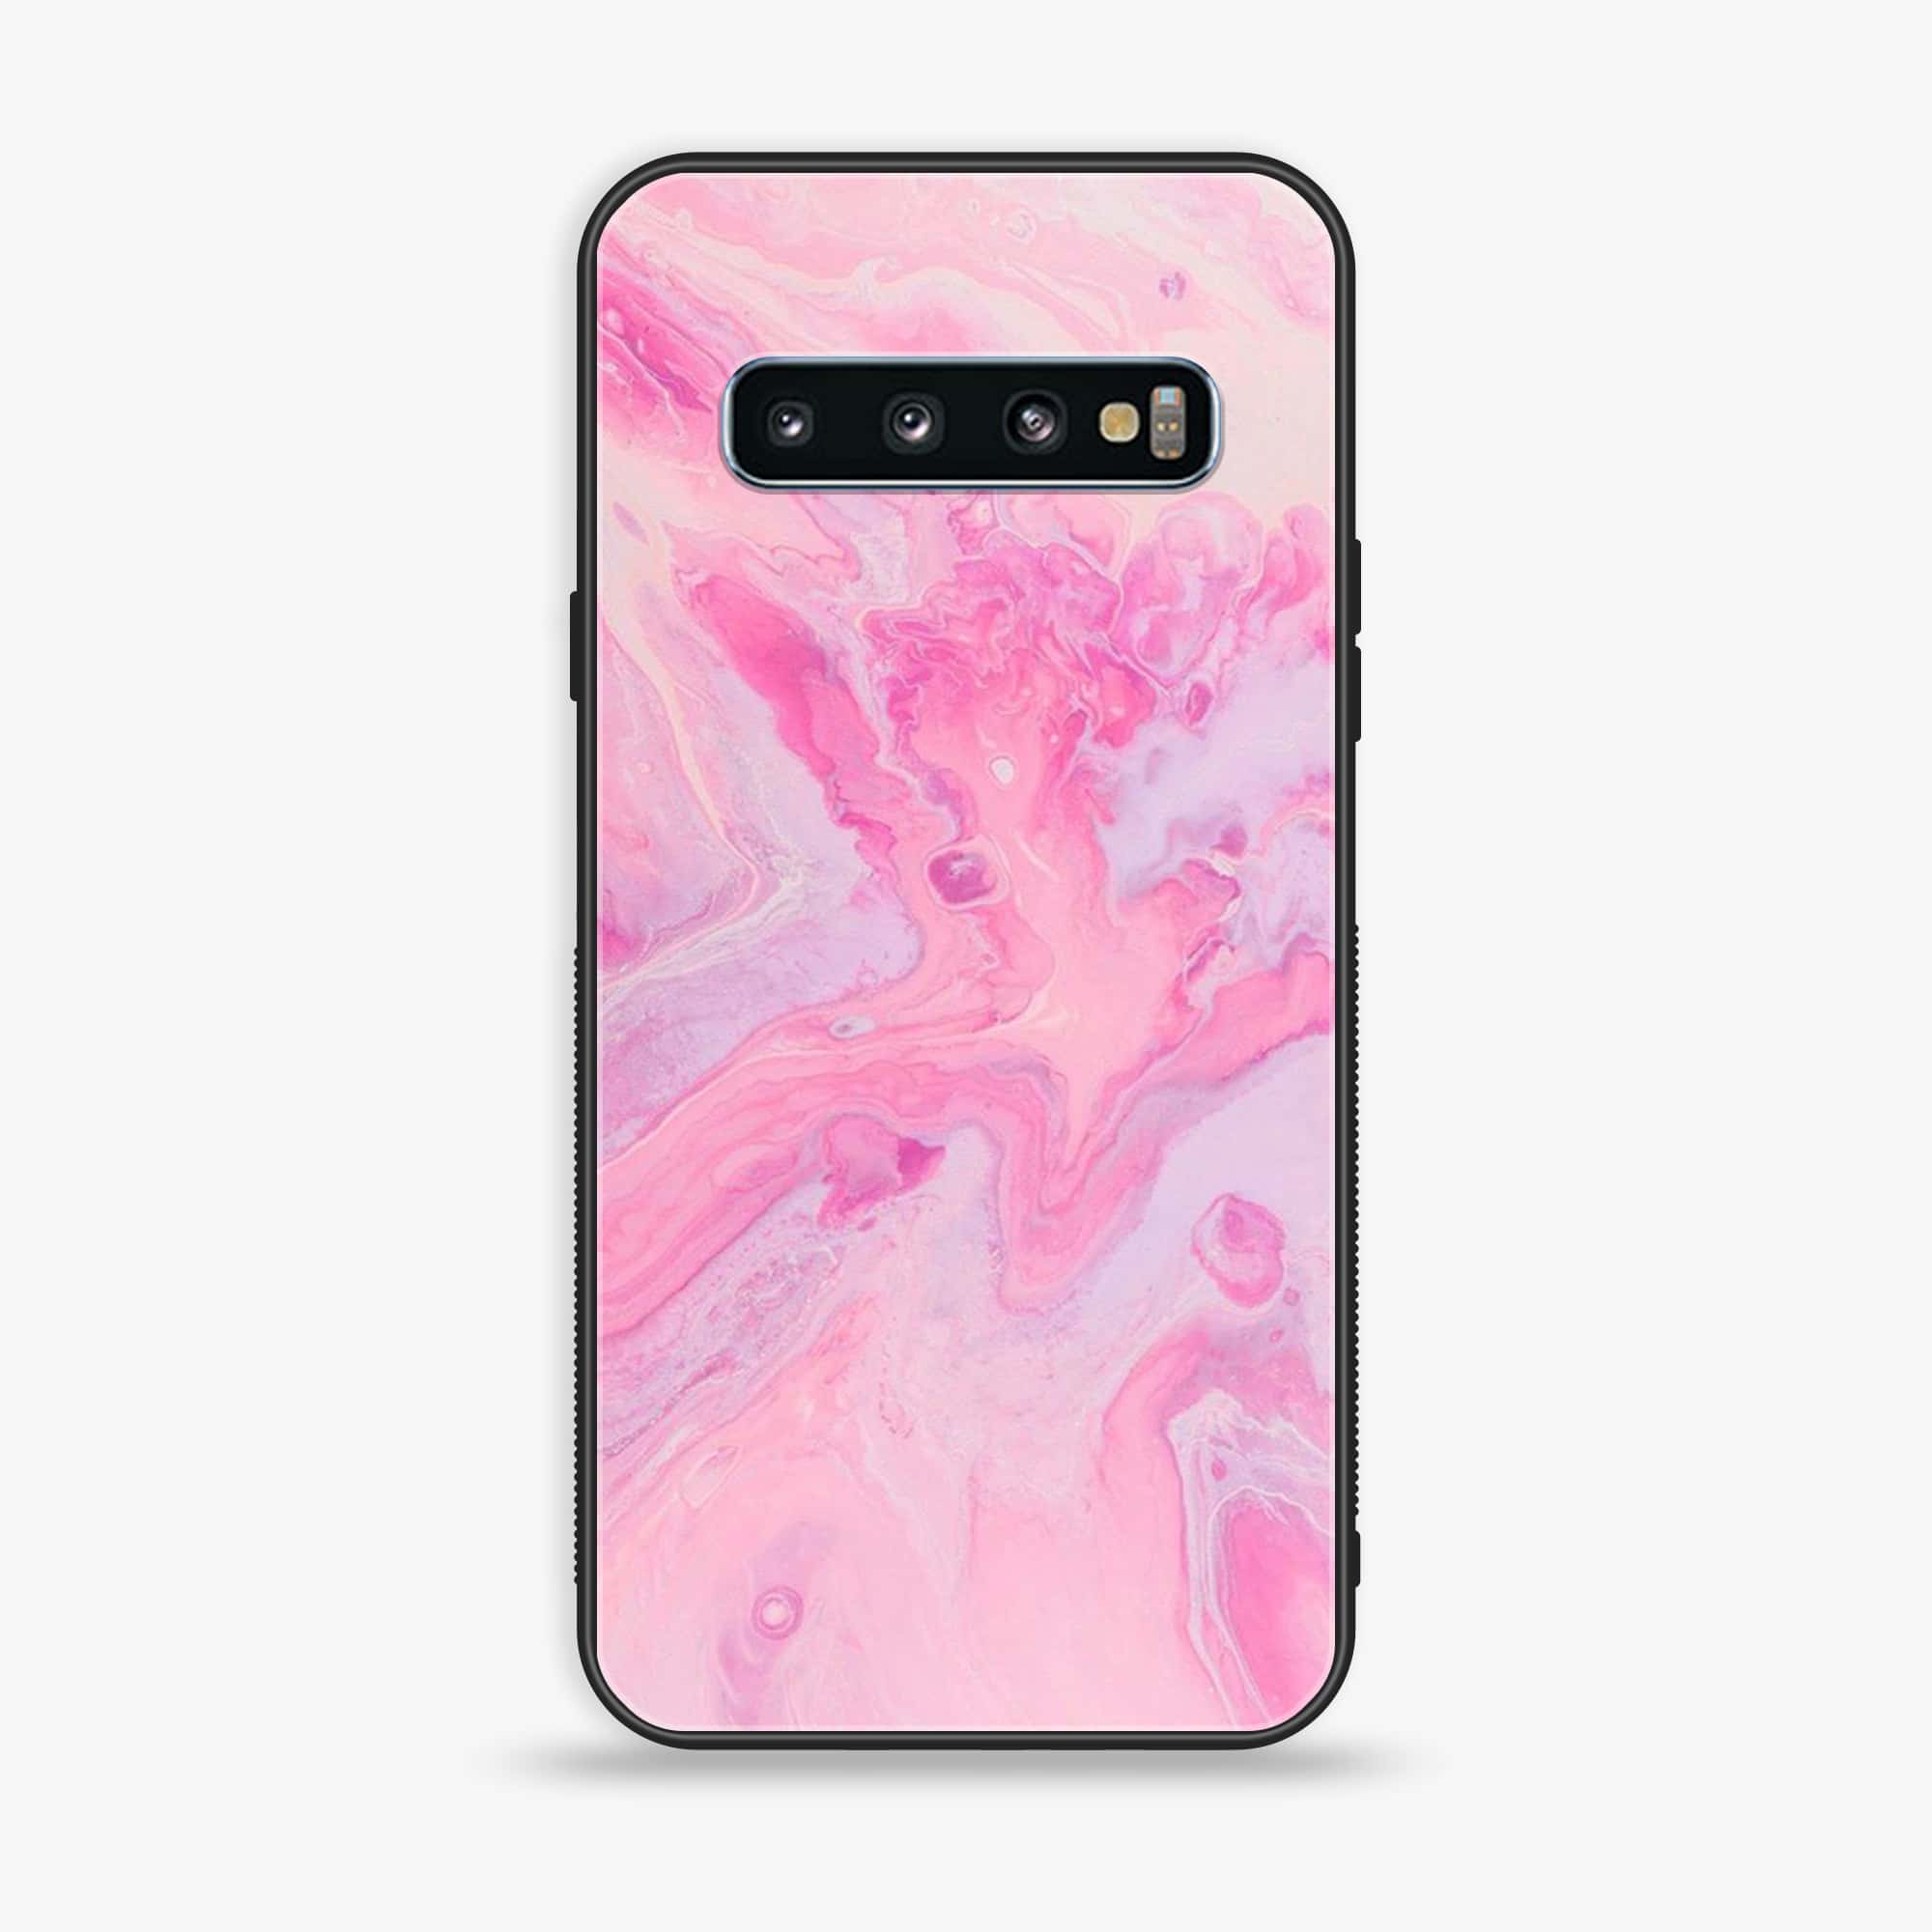 Samsung Galaxy S10 - Pink Marble Series - Premium Printed Glass soft Bumper shock Proof Case